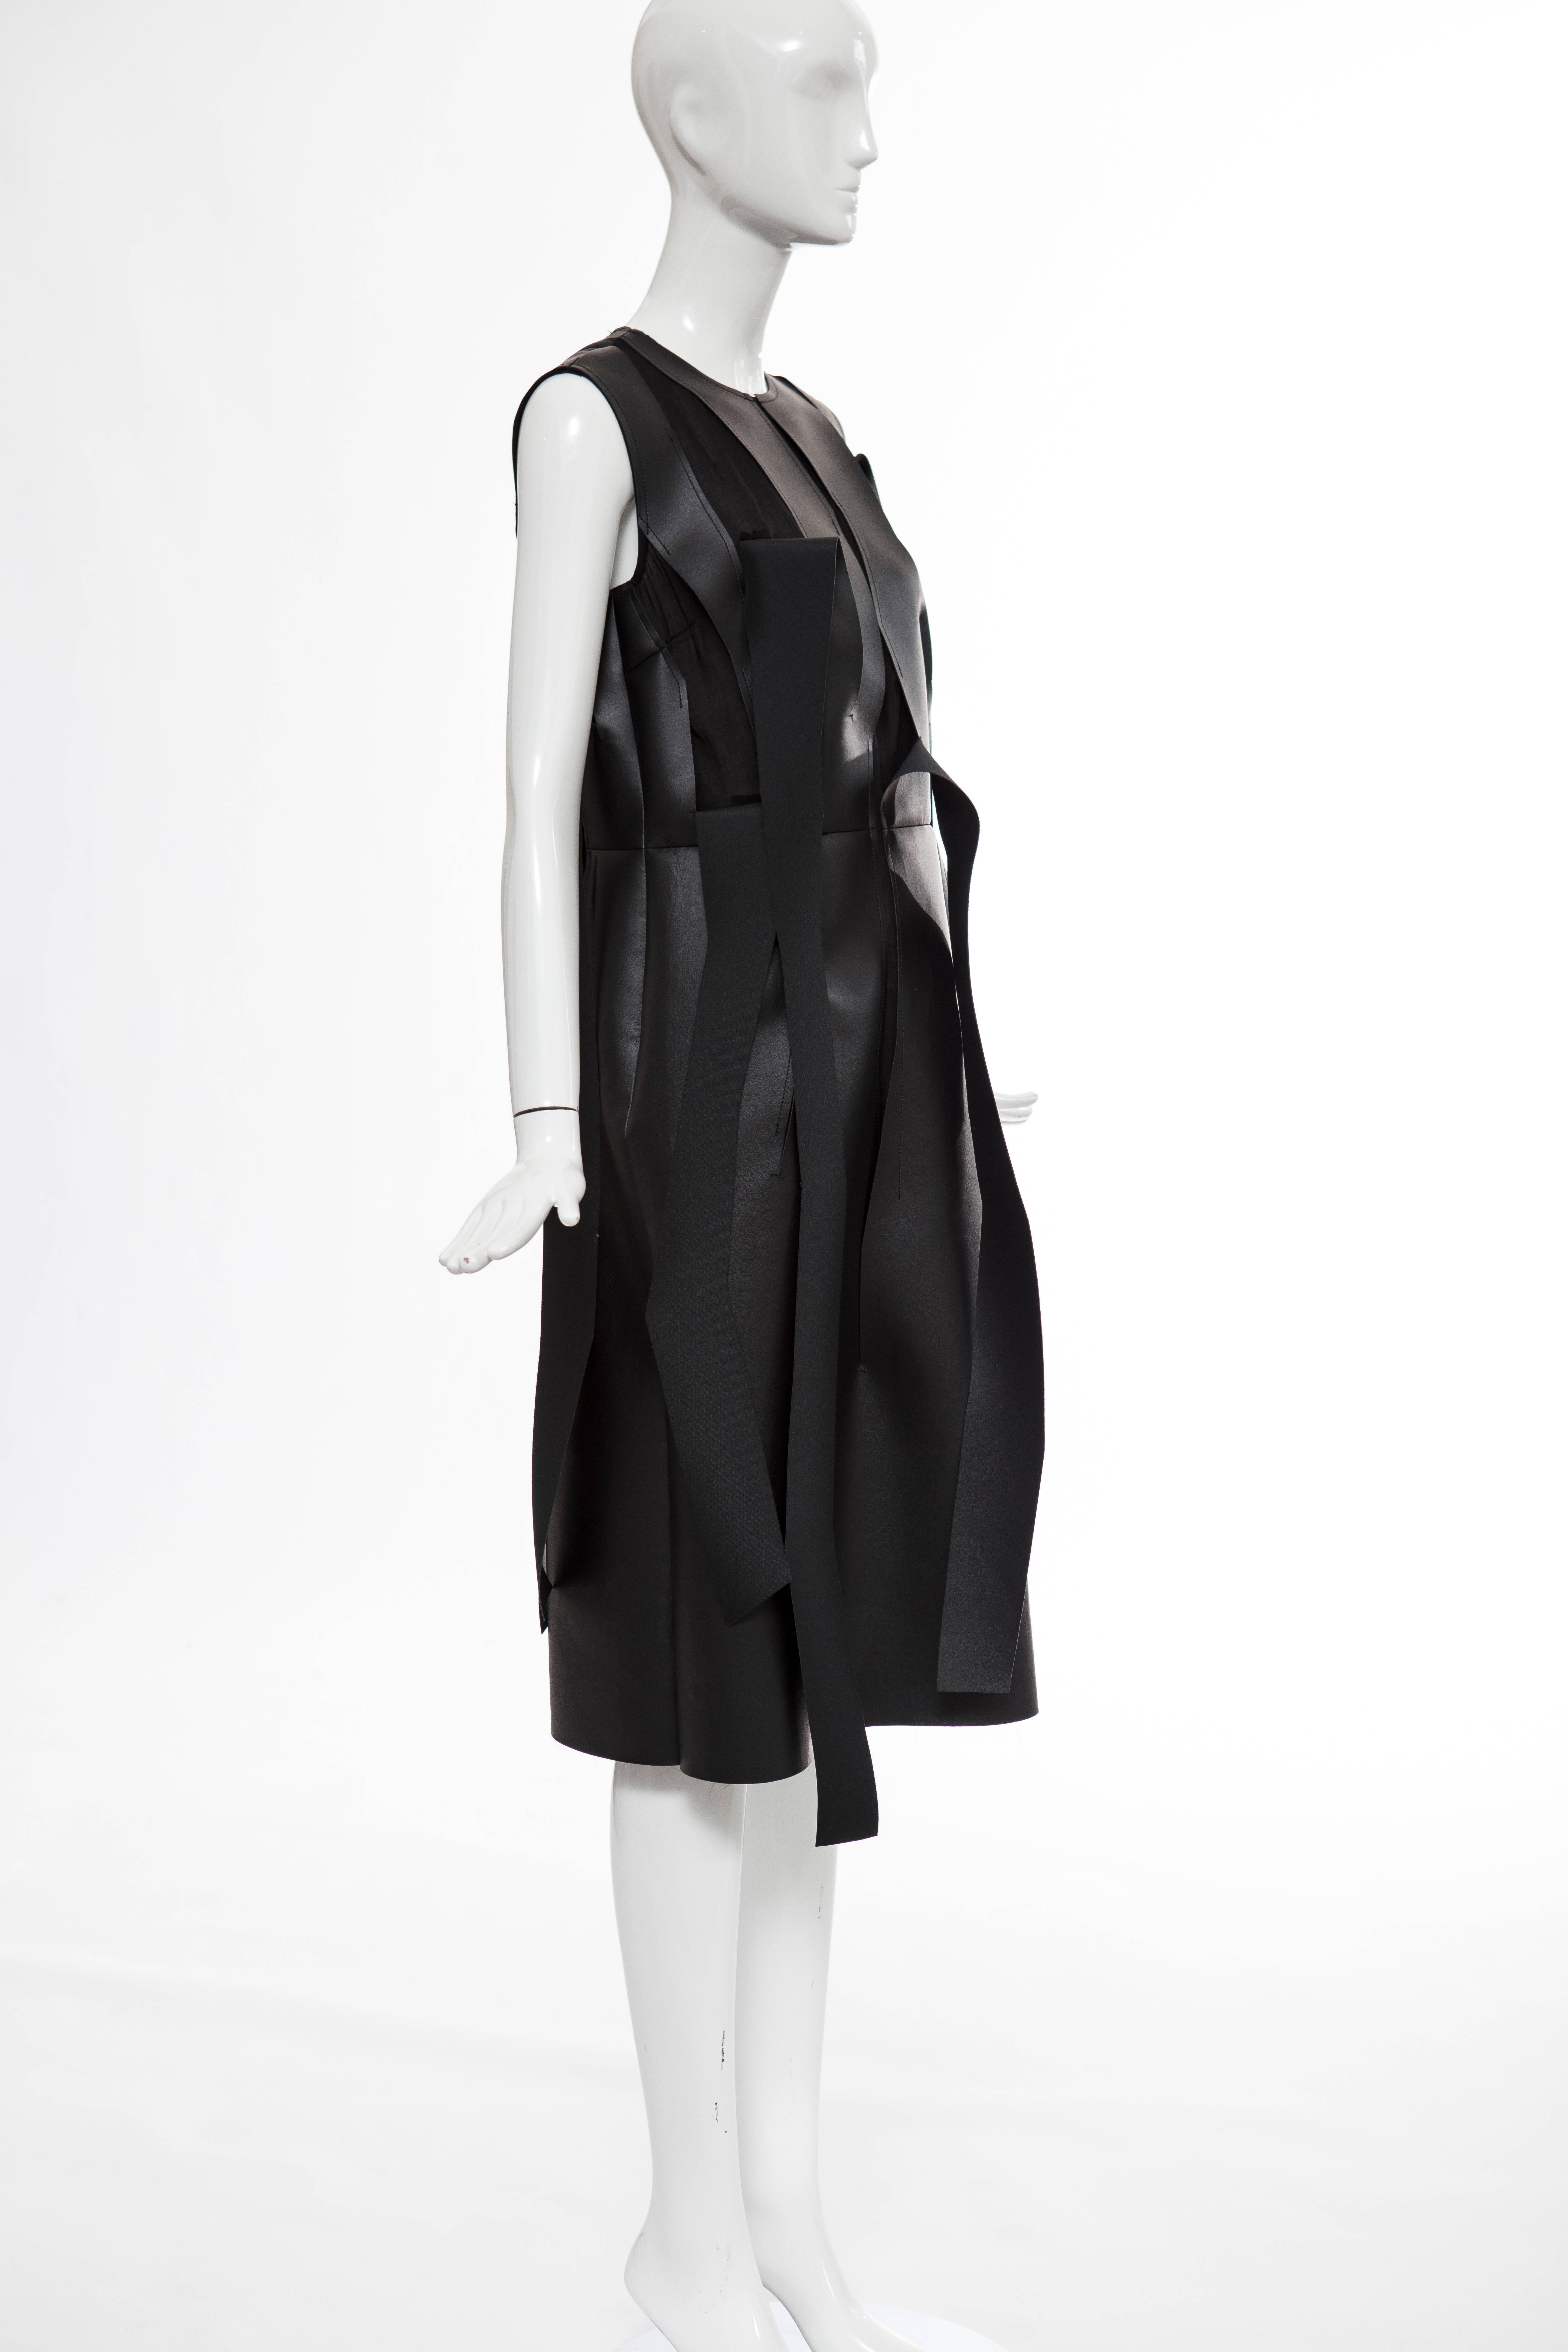 Comme des Garcons Black Synthetic Leather With Cutout Strips Dress, Circa 2014 1